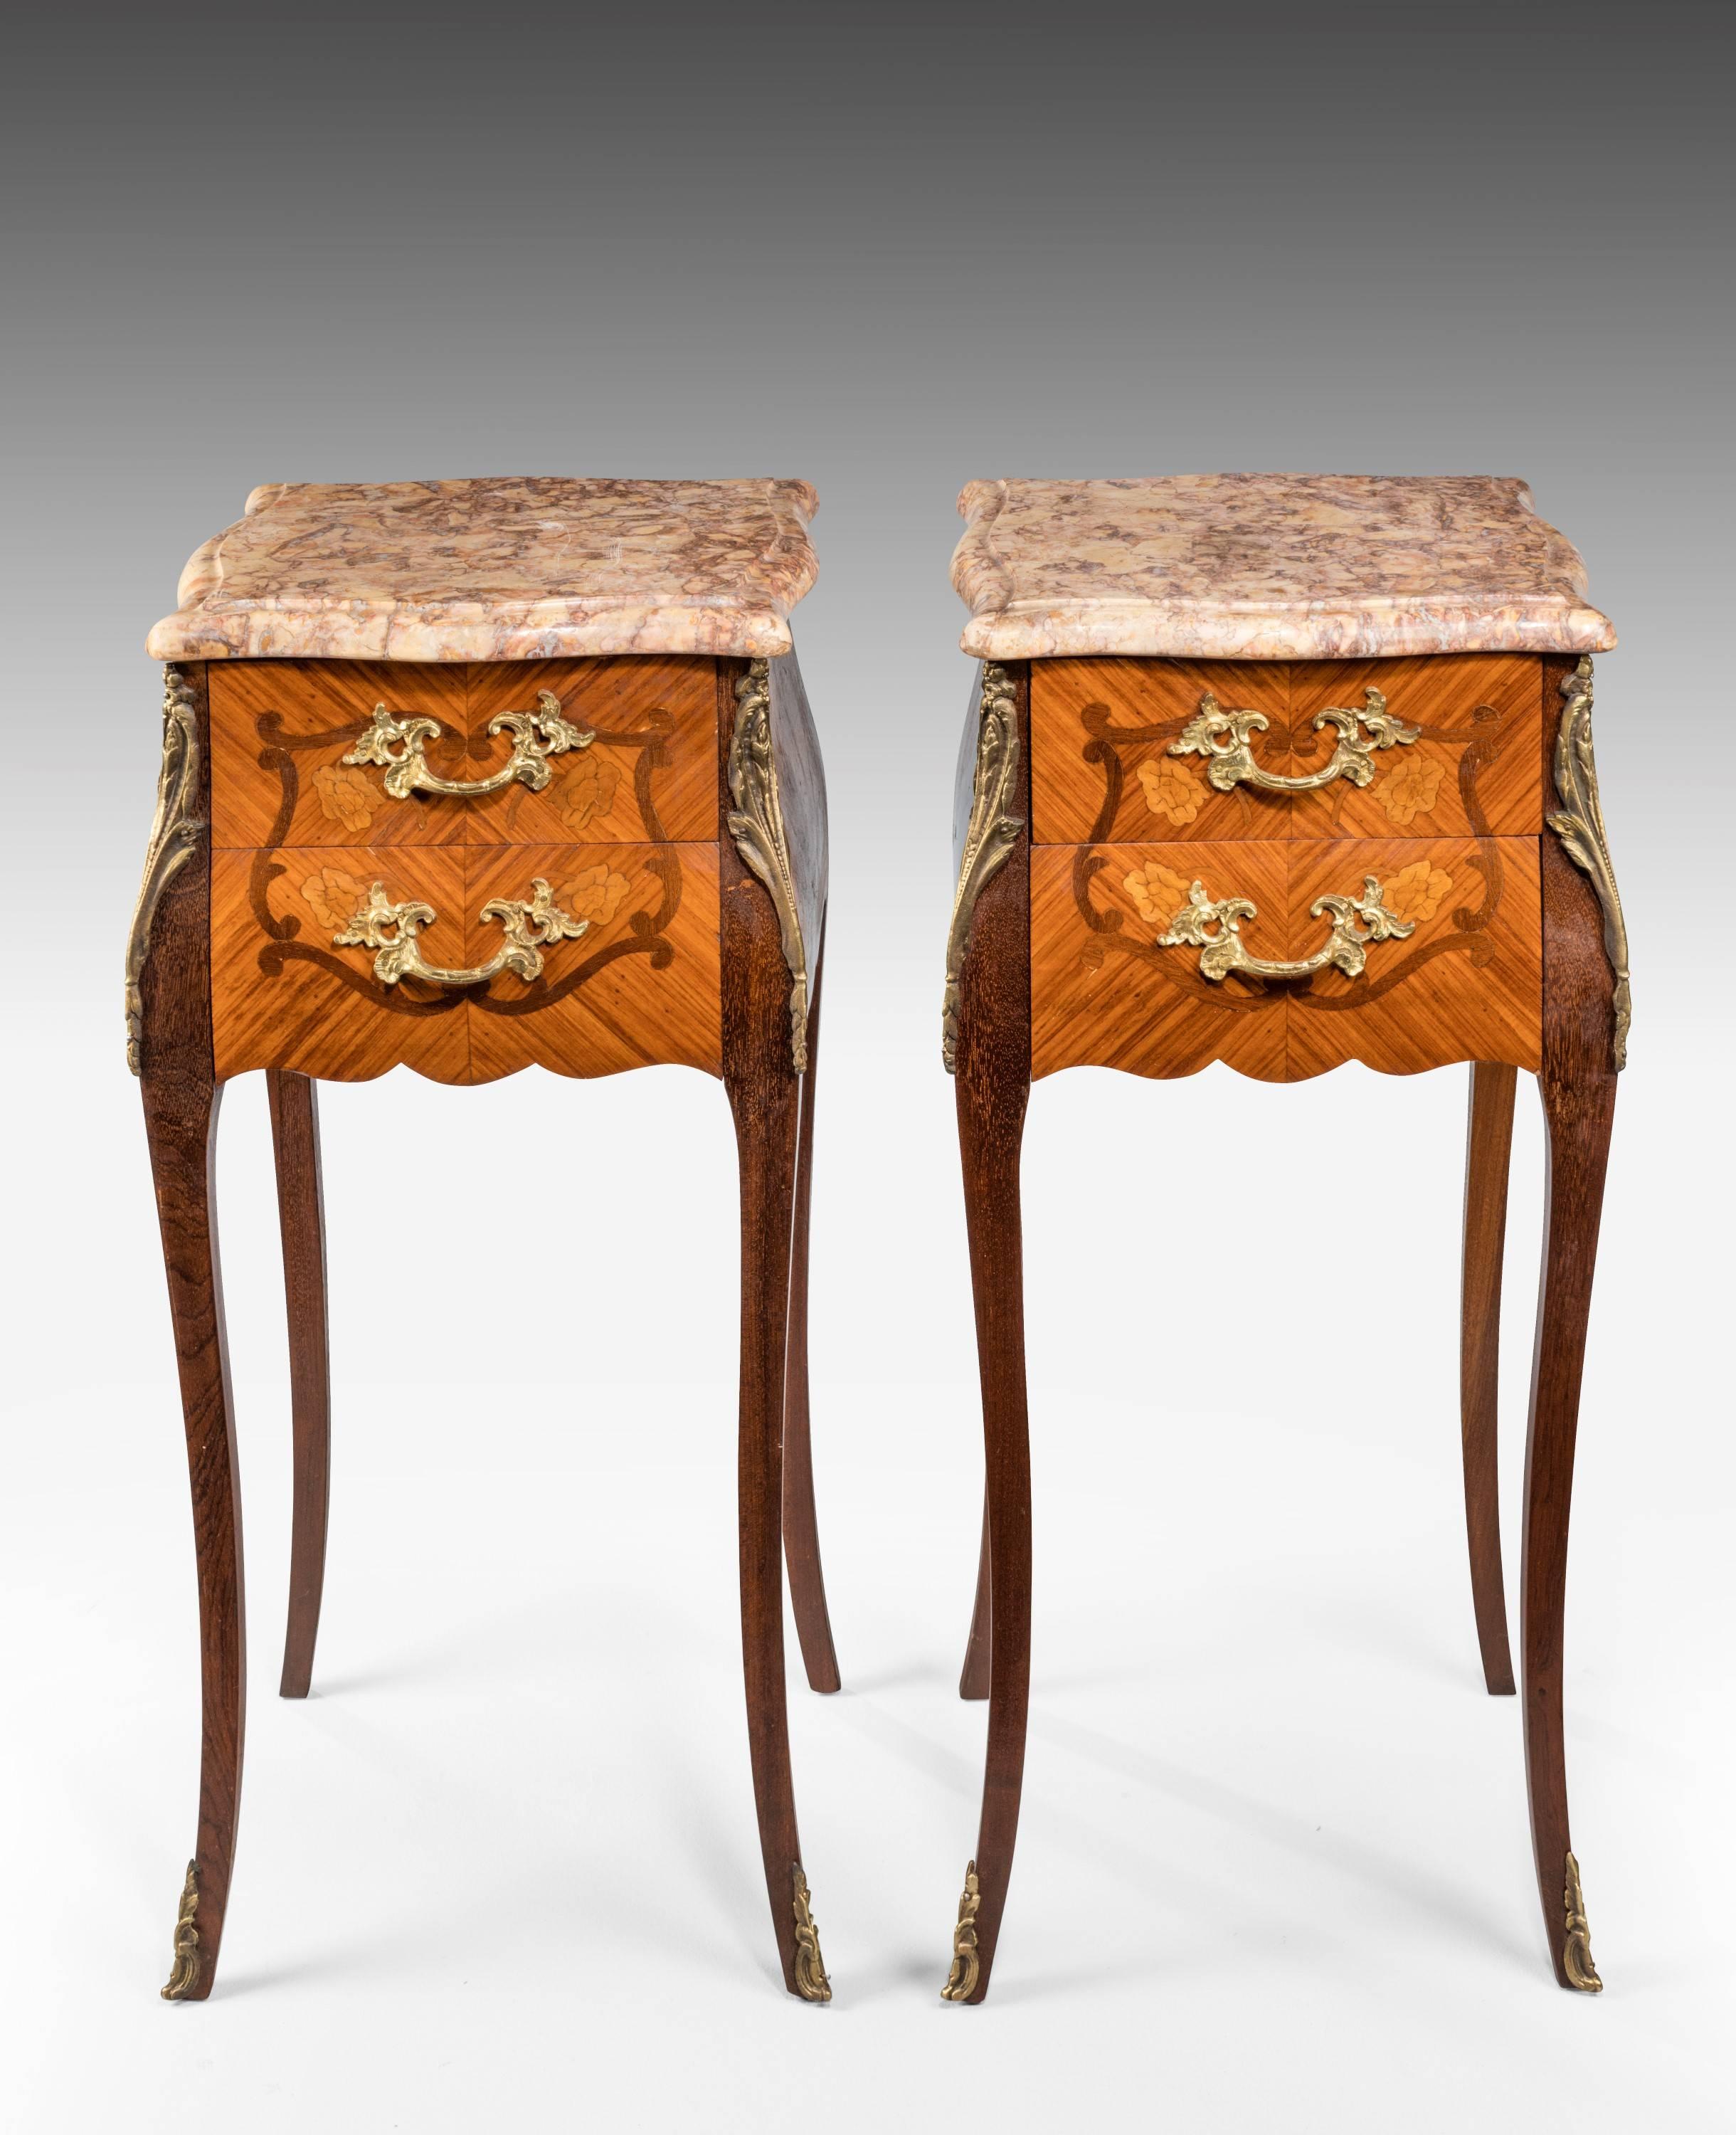 A most attractive pair of kingwood and marquetry petit commodes on cabriole supports. Retaining the original gilt bronze mounts. Well figured marble tops. Each with two drawers.